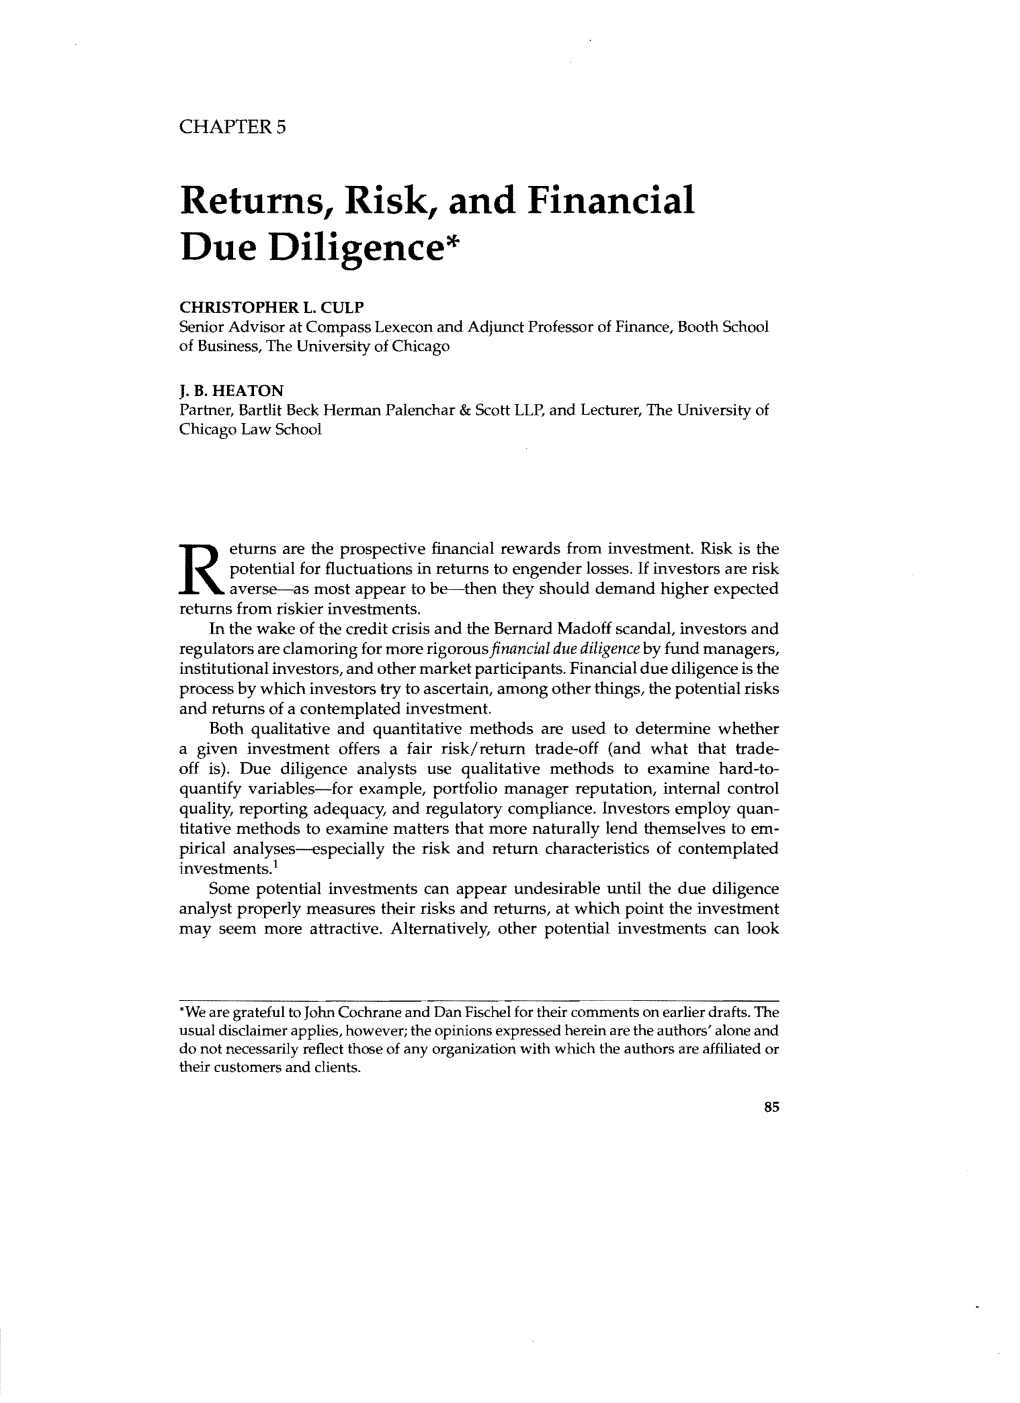 Returns, Risk, and Financial Due Diligence*